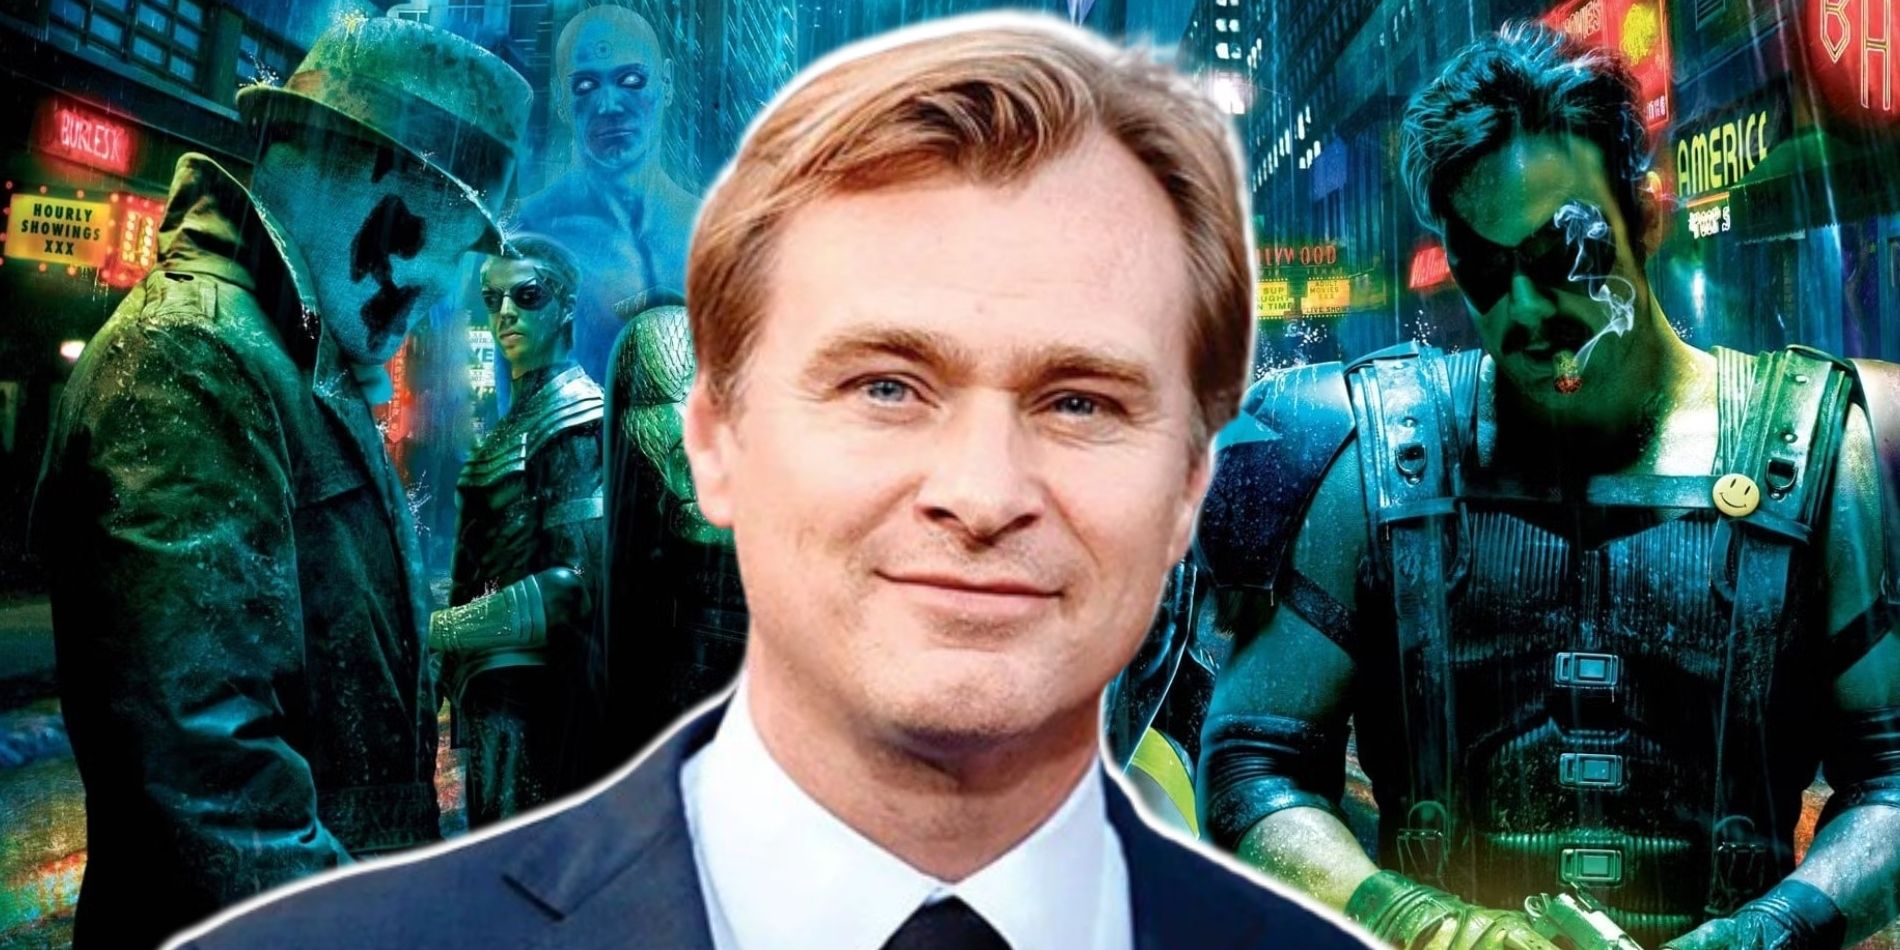 Christopher Nolan in front of a still from the live-action Watchmen adaptation